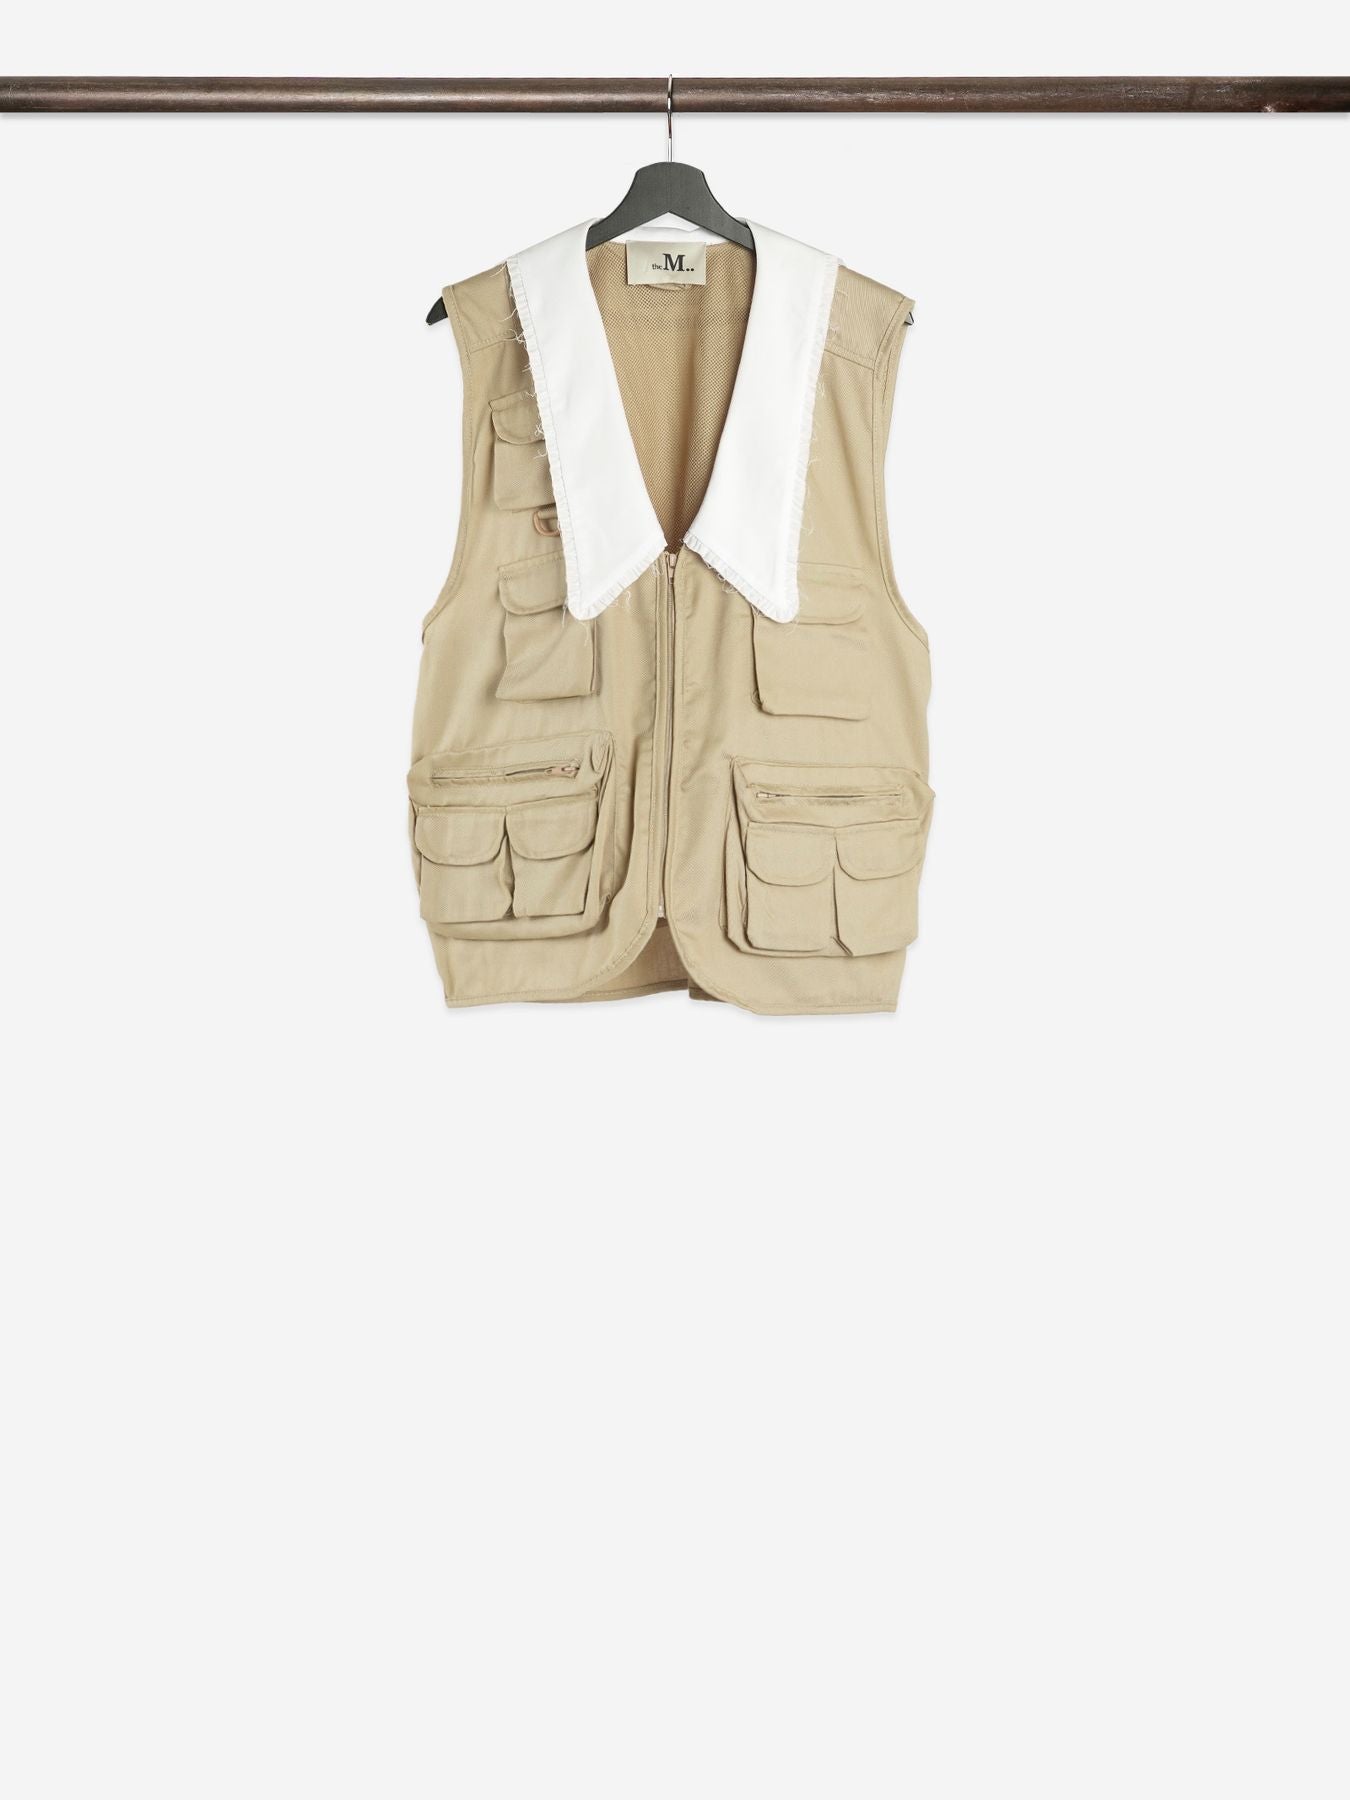 the M Gilet